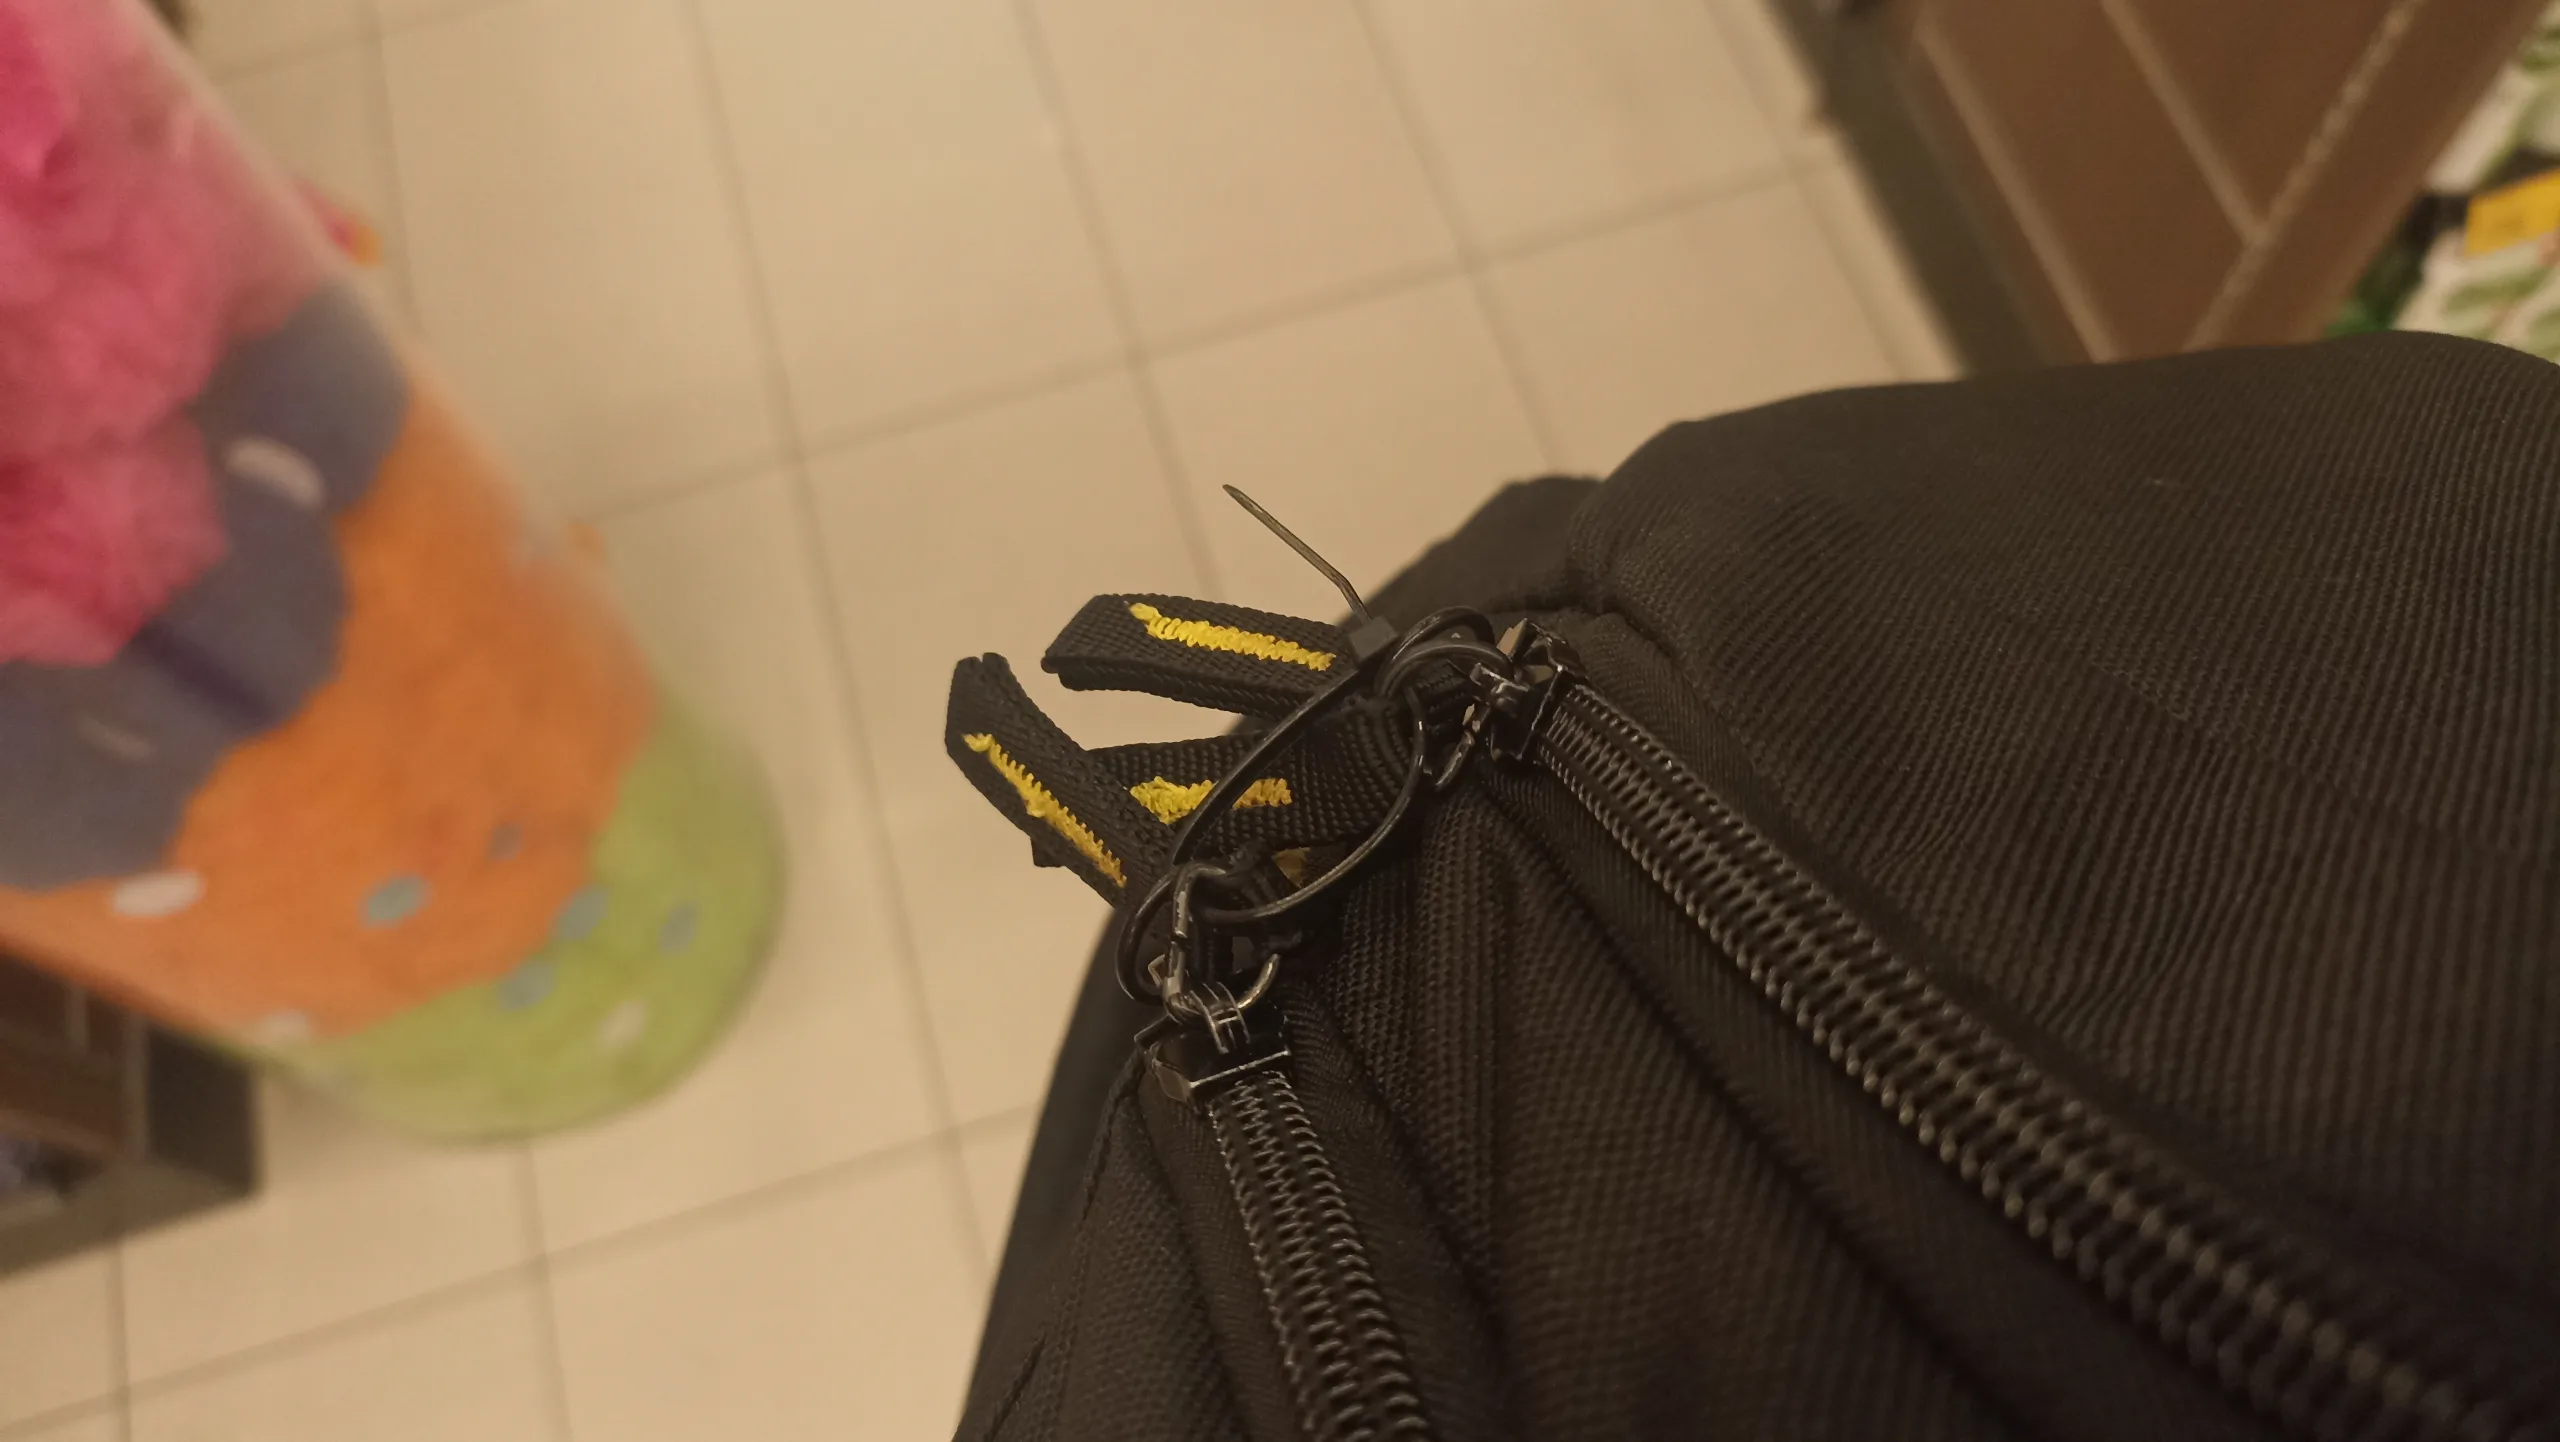 A backpack tied shut by a security guard in Kuala Lumpur, Malaysia to prevent shoplifting.